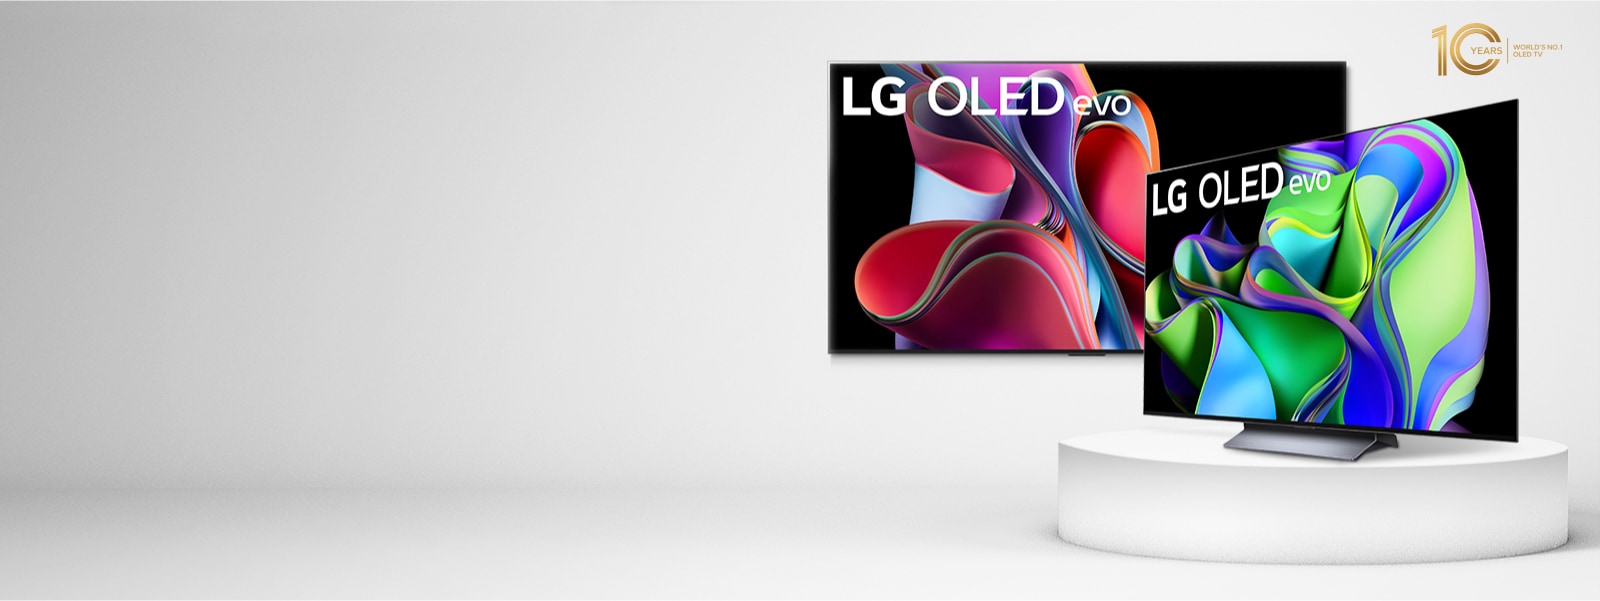 2 LG OLED TVs with infill 